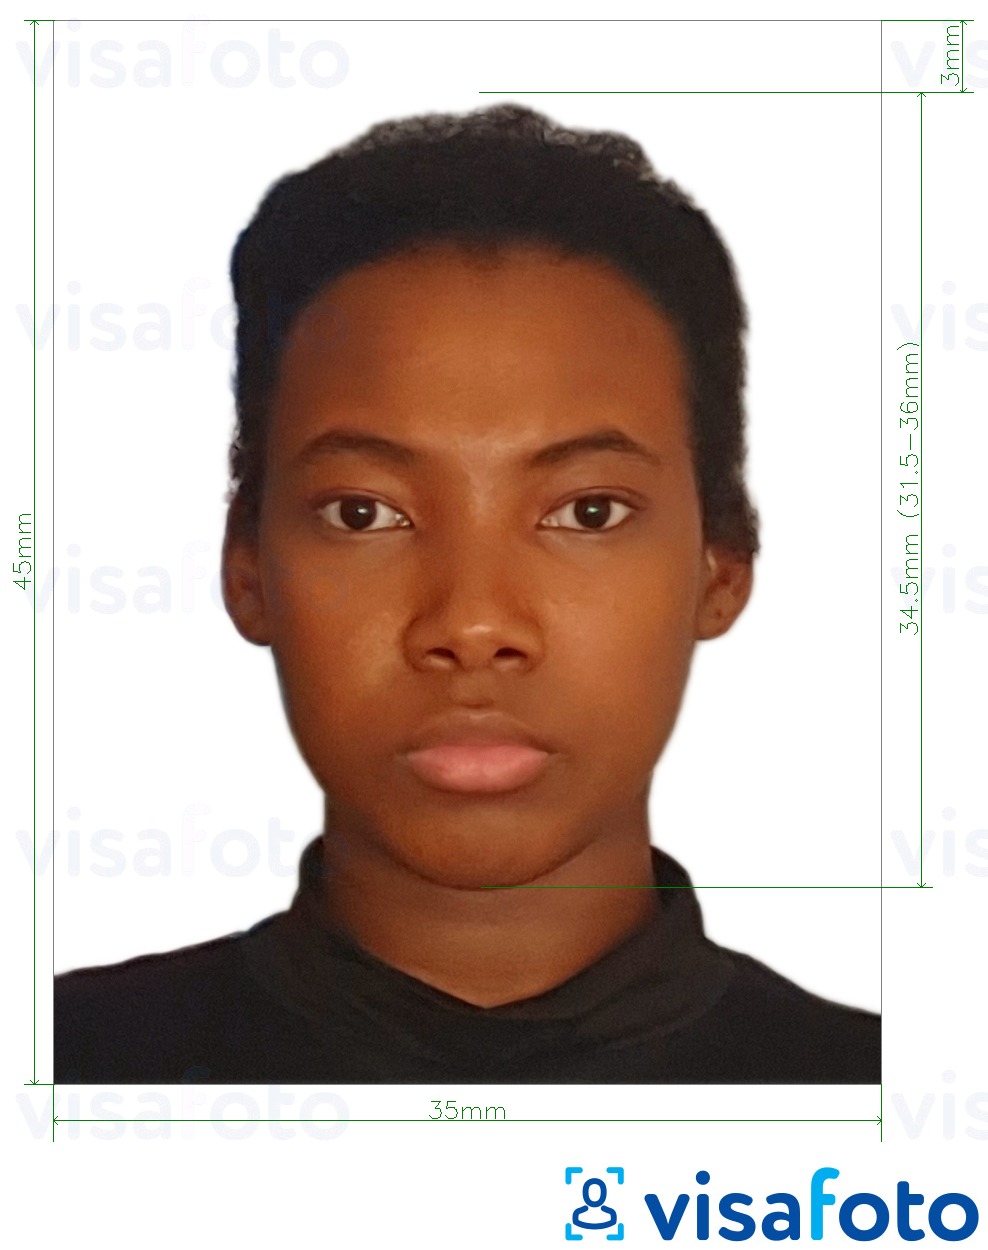 Example of photo for Ghana passport 3.5x4.5 cm (35x45 mm) with exact size specification